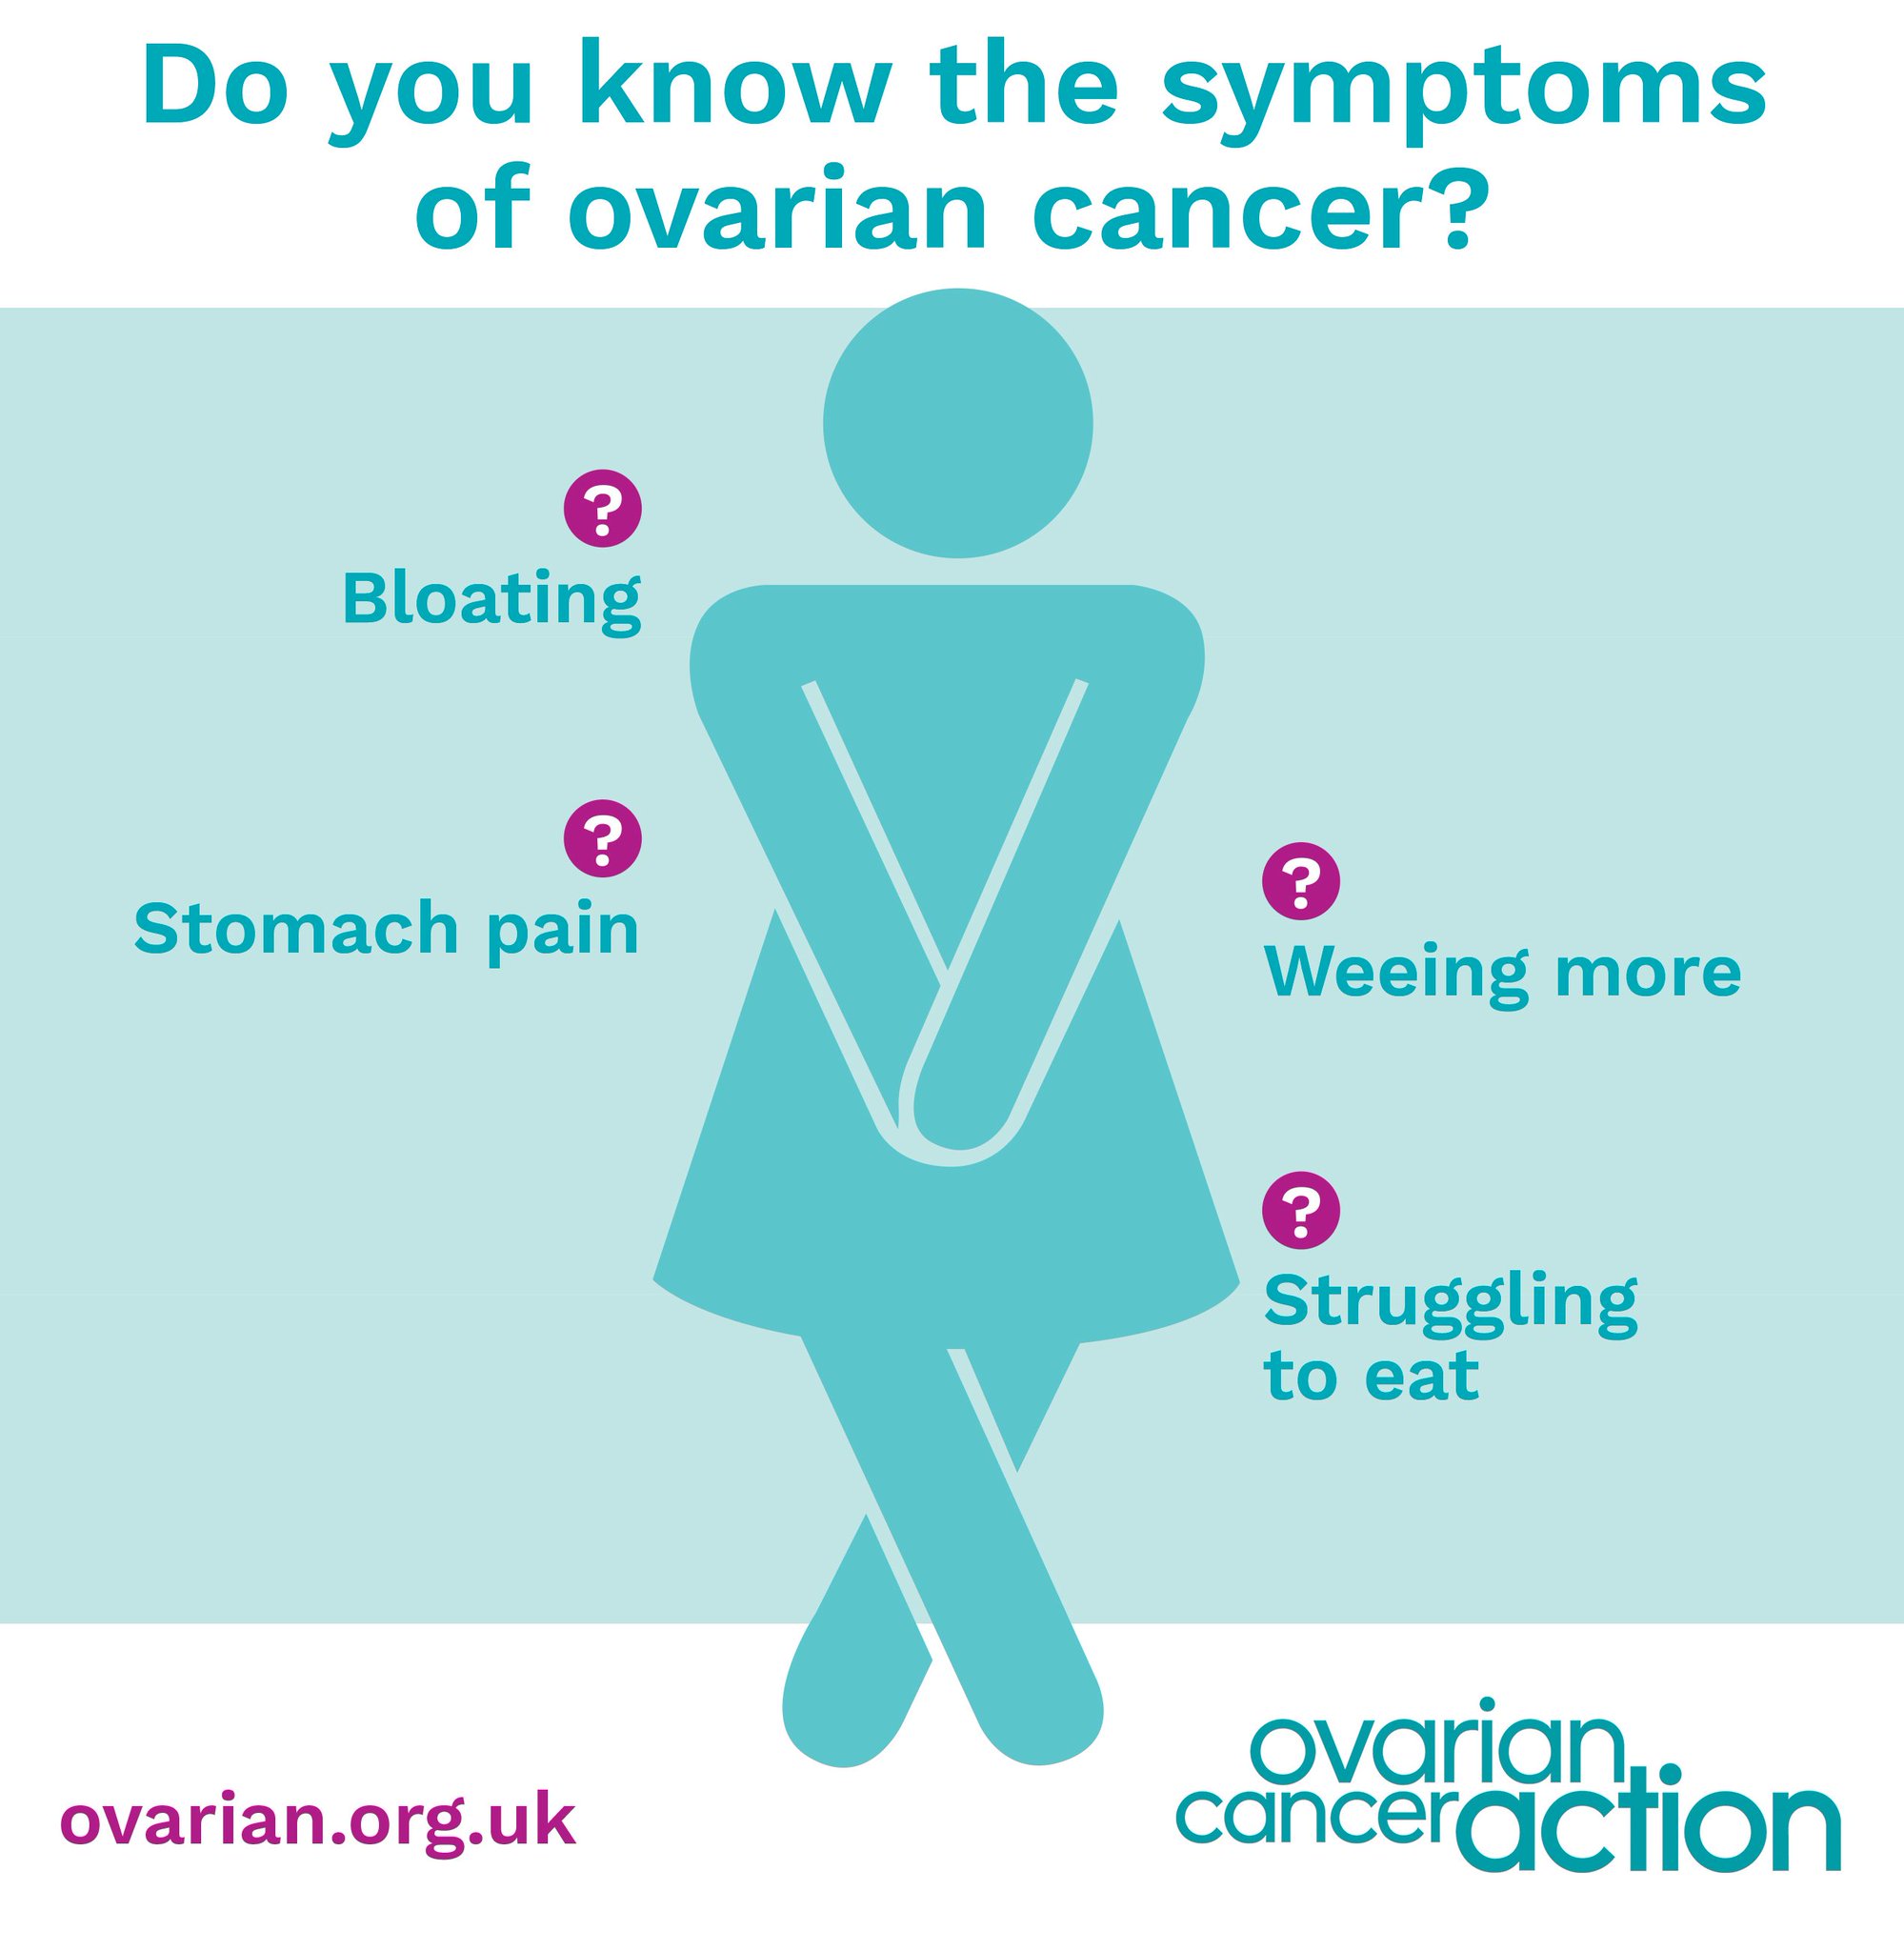 Ovarian Cancer Action On Twitter Bloating Feeling Full And Stomach Pain Can All Be Signs Of Overdoing It At Christmas But If Your Symptoms Are Persistent Frequent Severe Or Out Of The